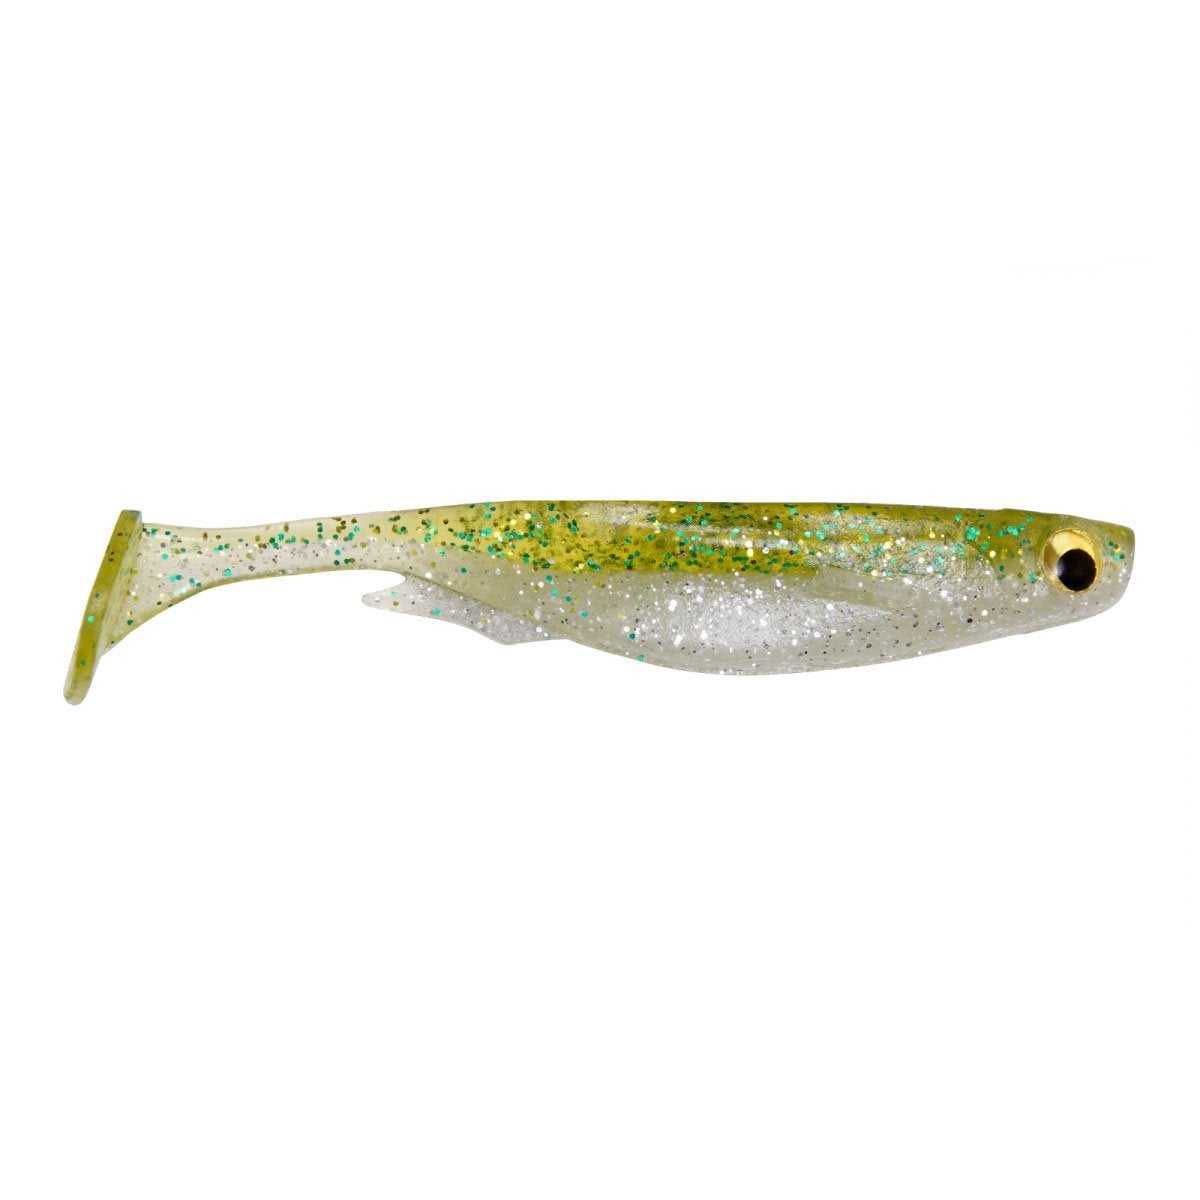 The Megabass Spark Shad! Are These The Best Small Soft Swimbaits